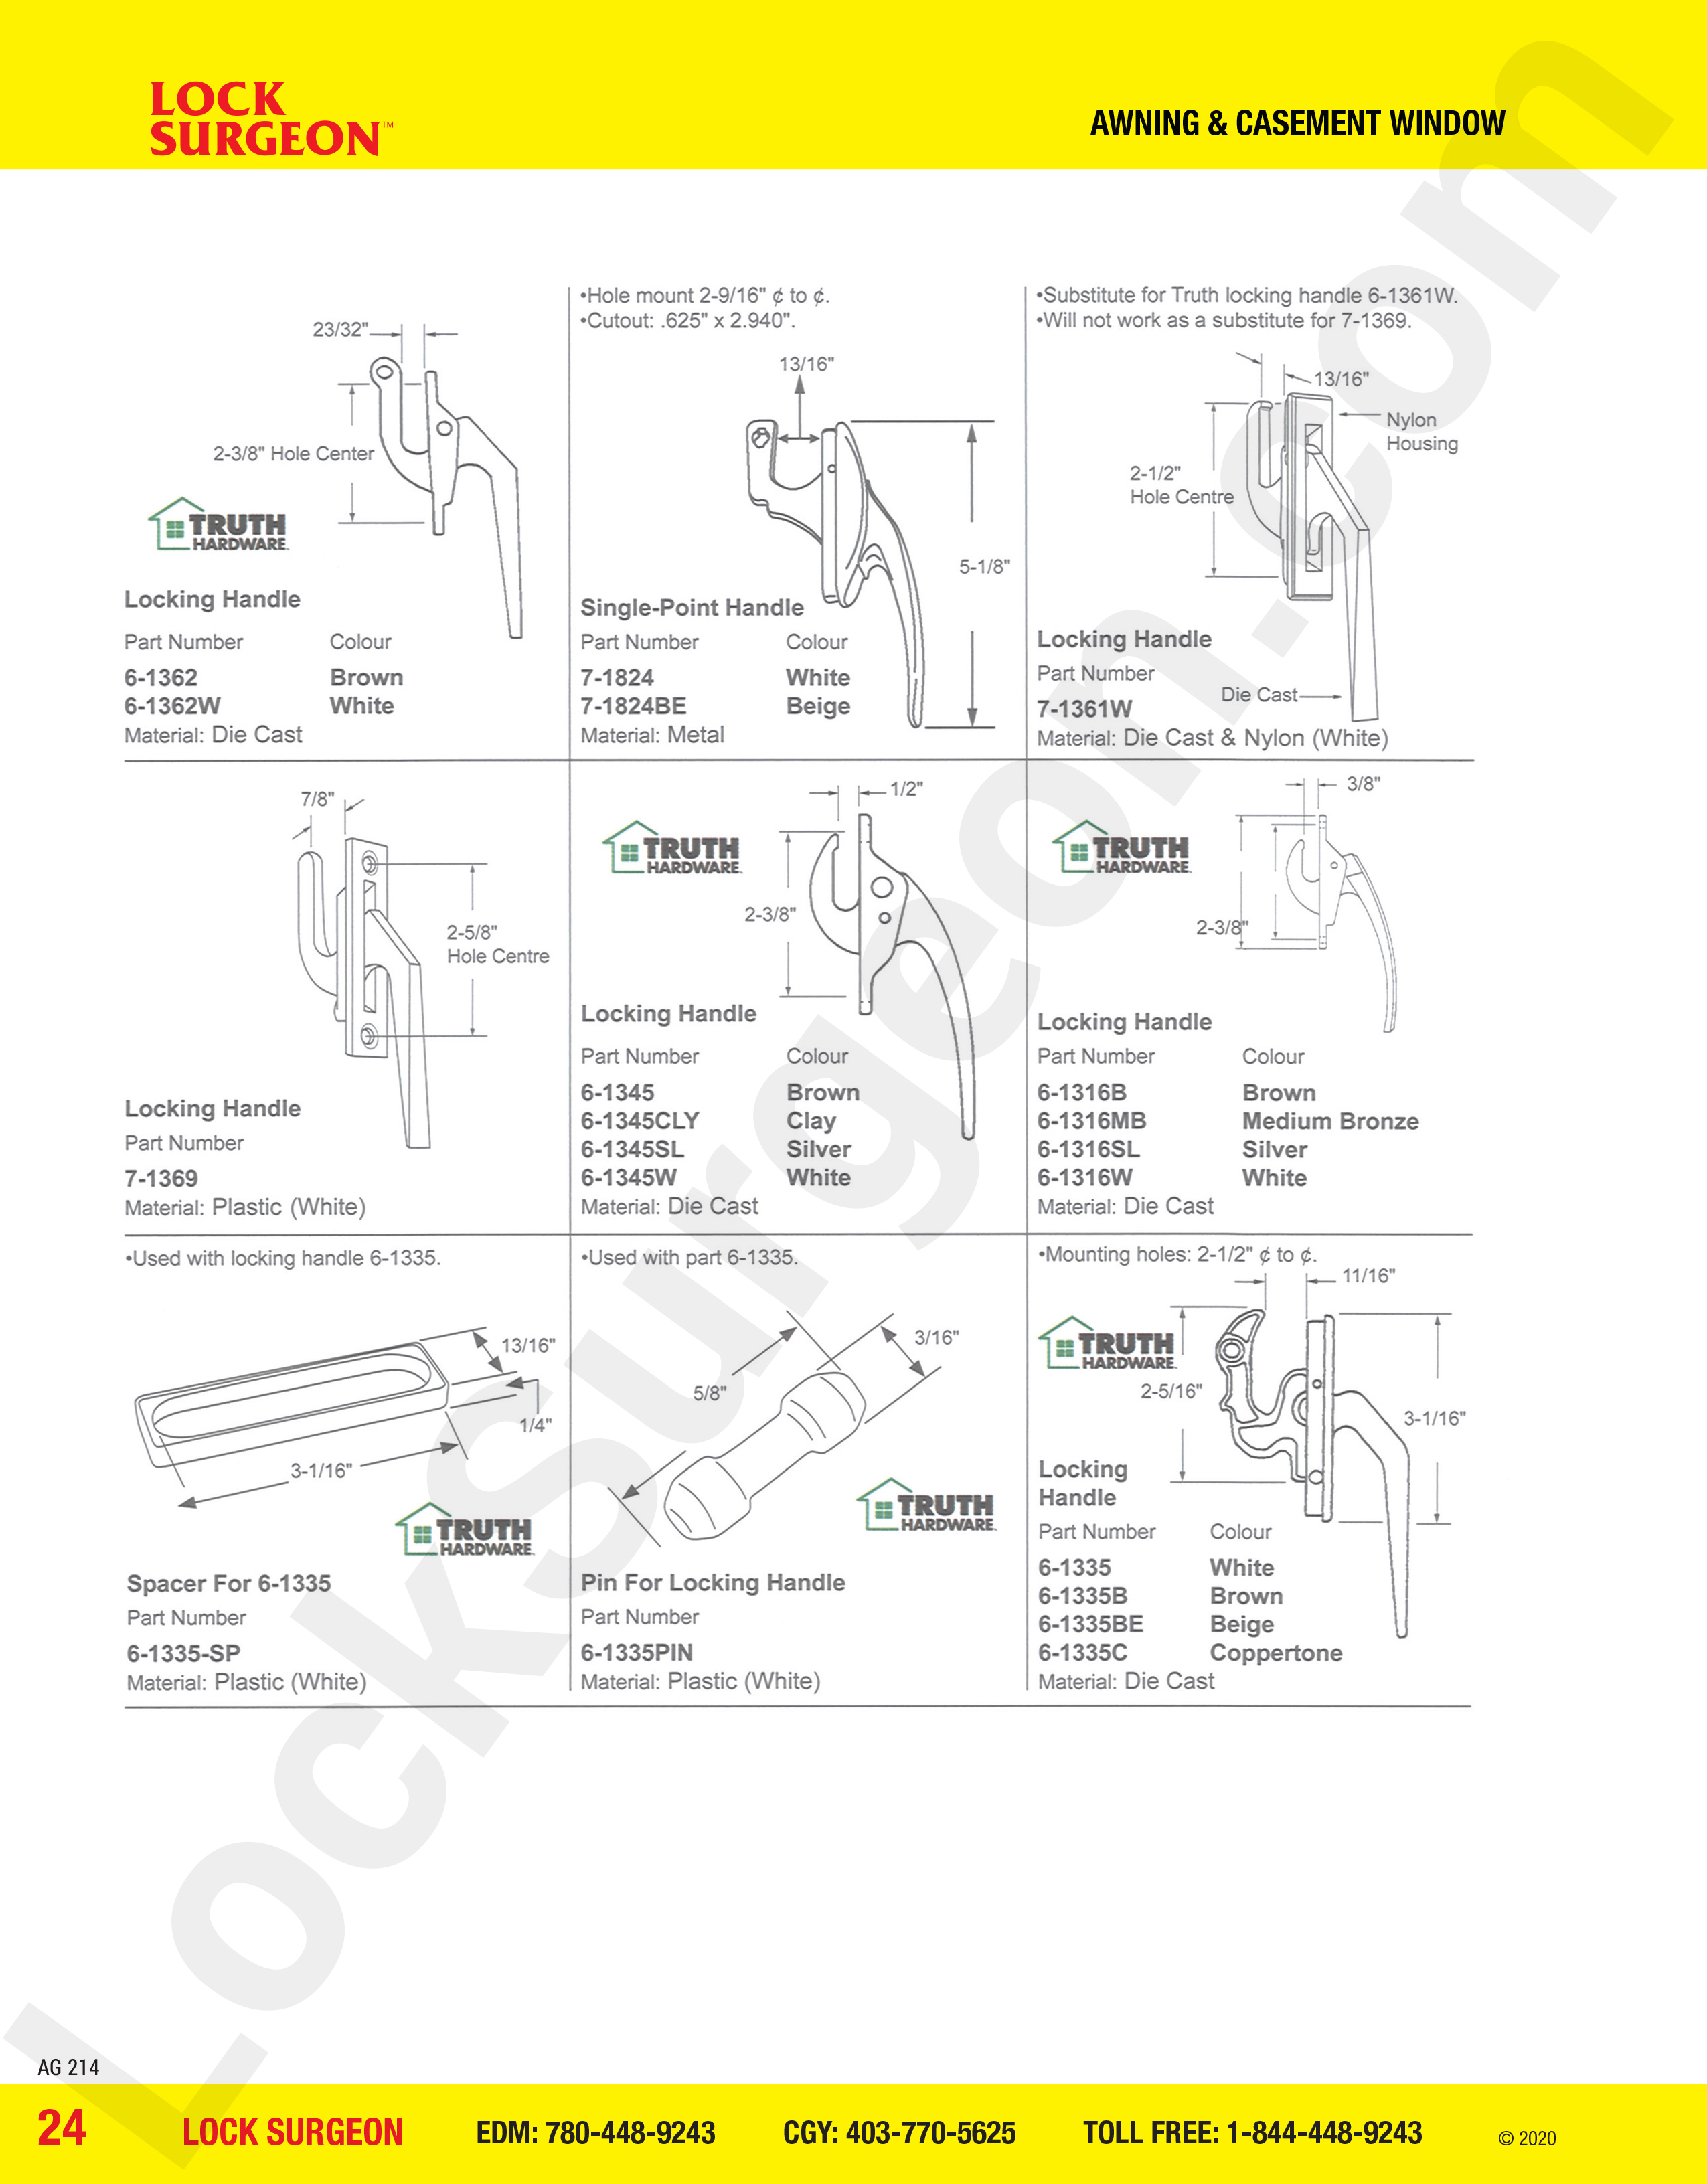 awning and casement window parts for locking handles.